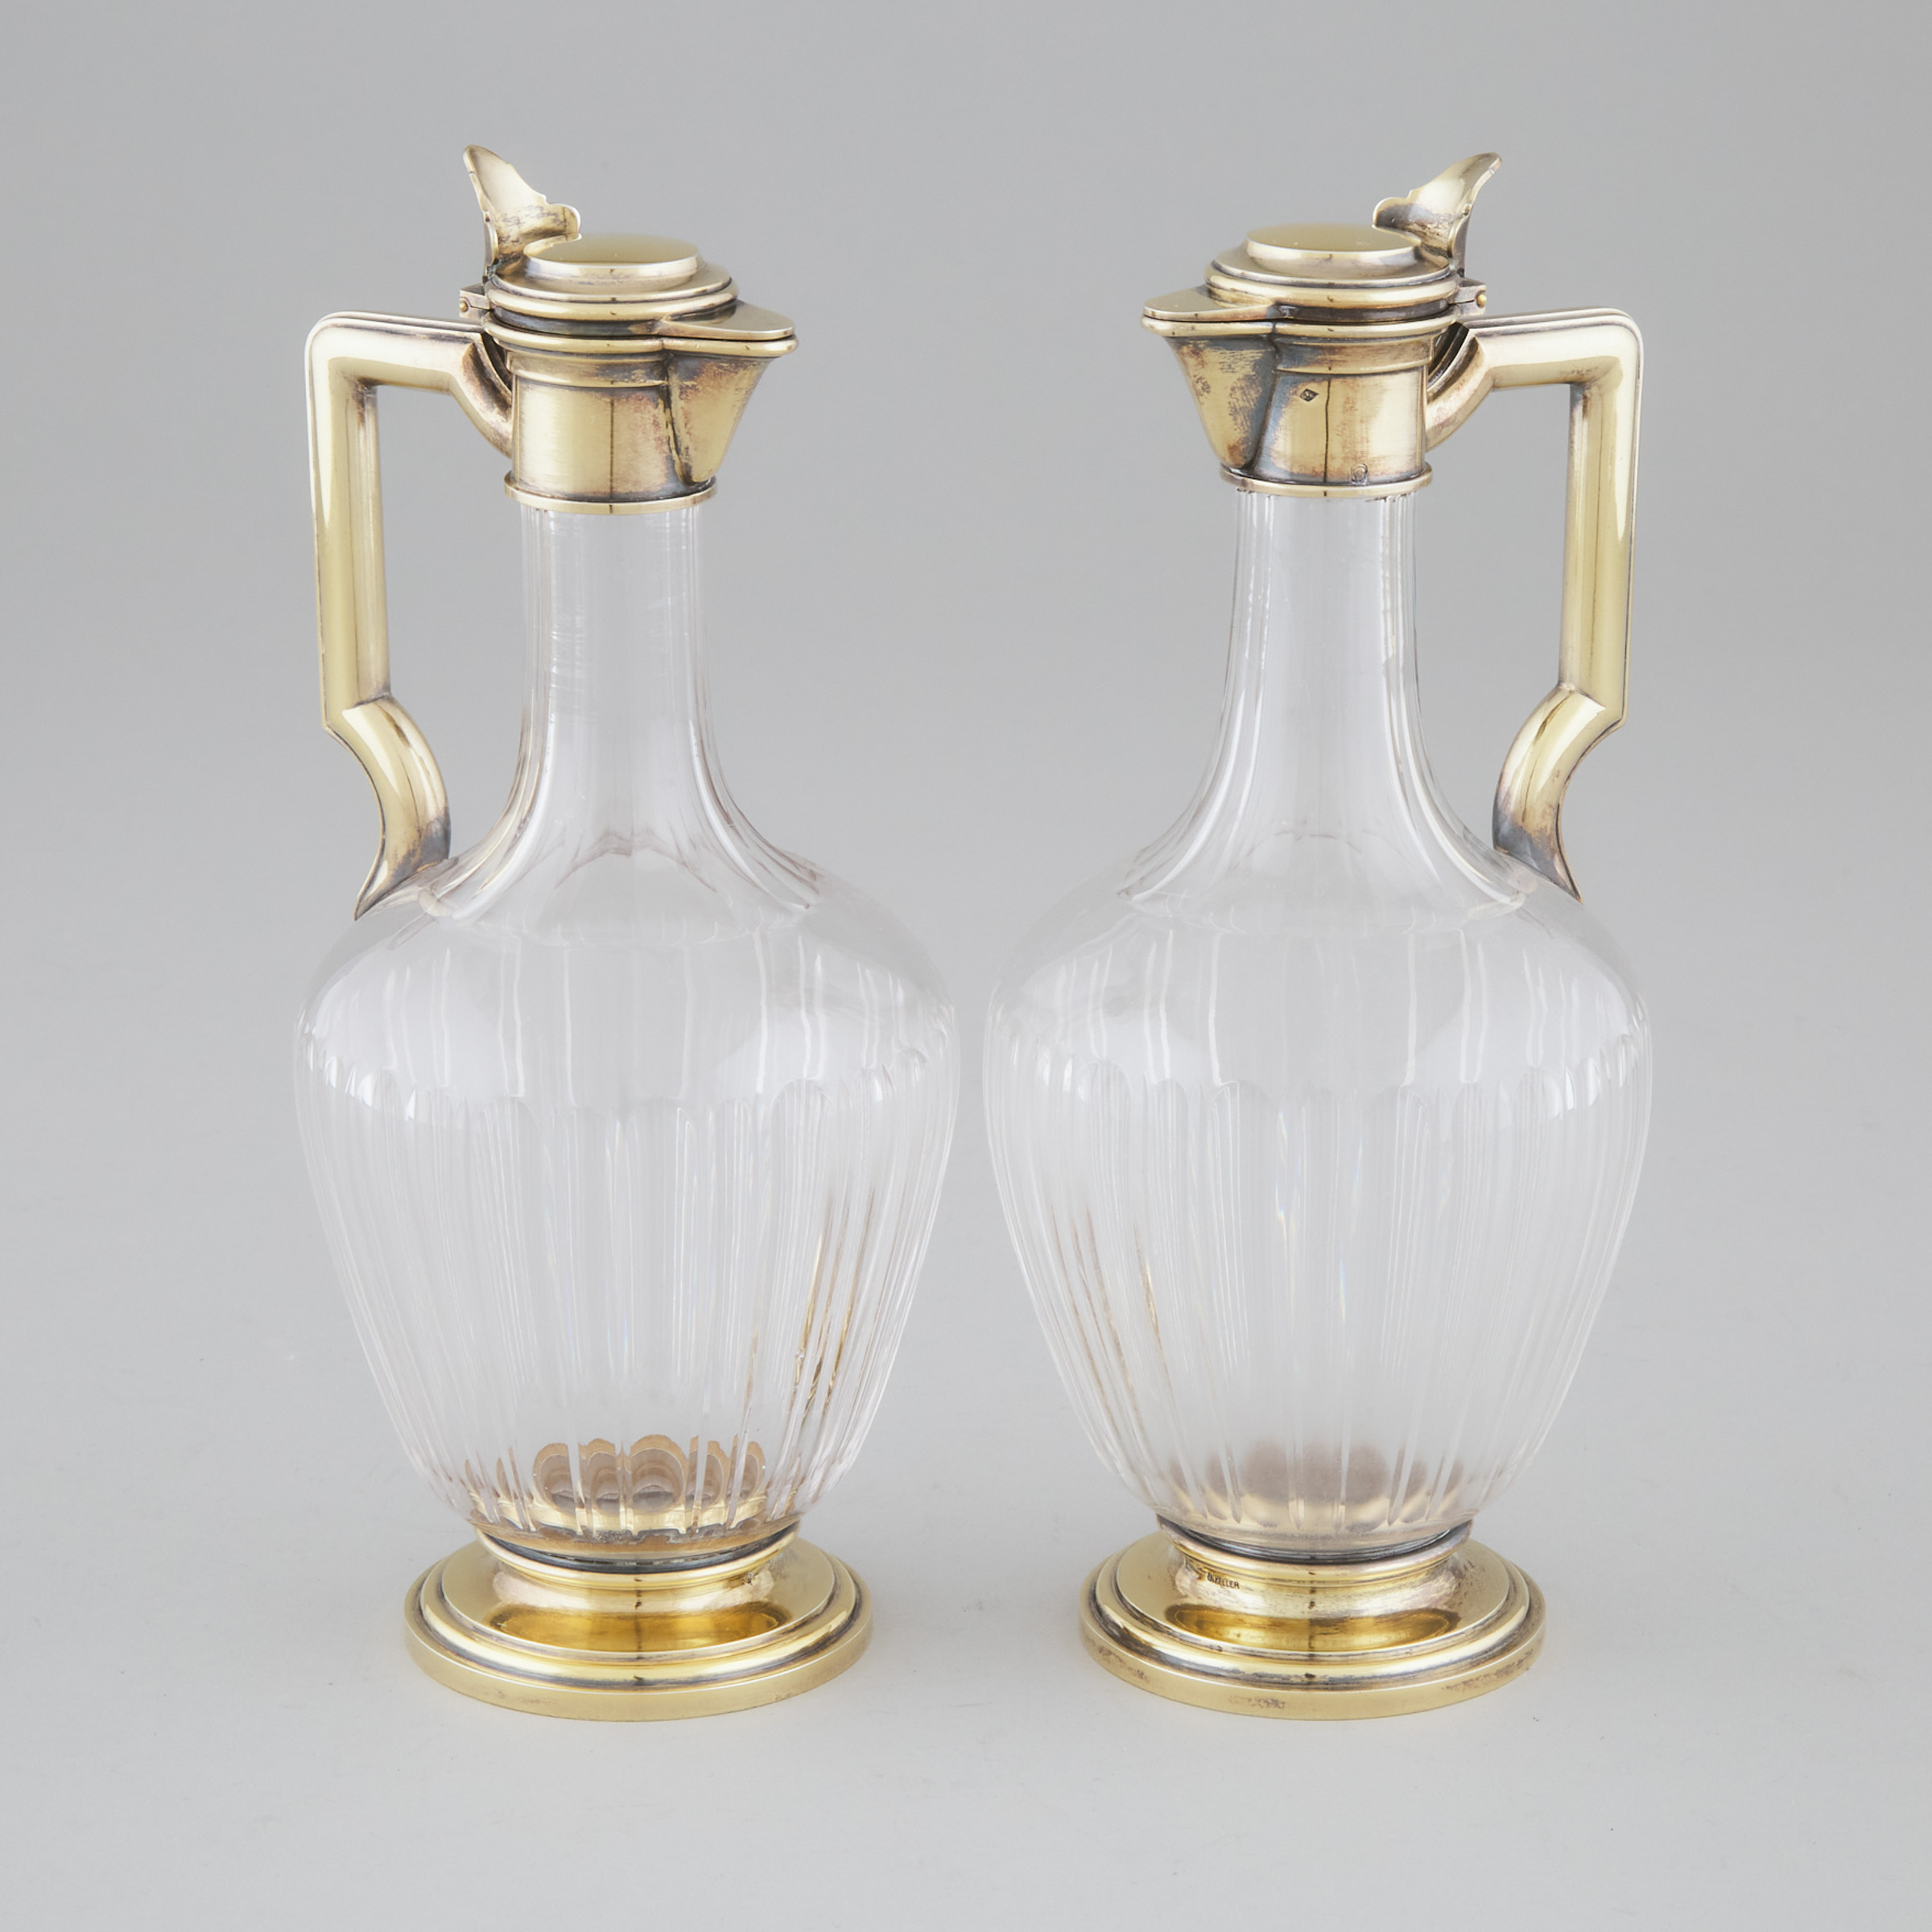 Pair of French Silver-Gilt and Cut Glass Wine Ewers, Gustave Keller, Paris, c.1900